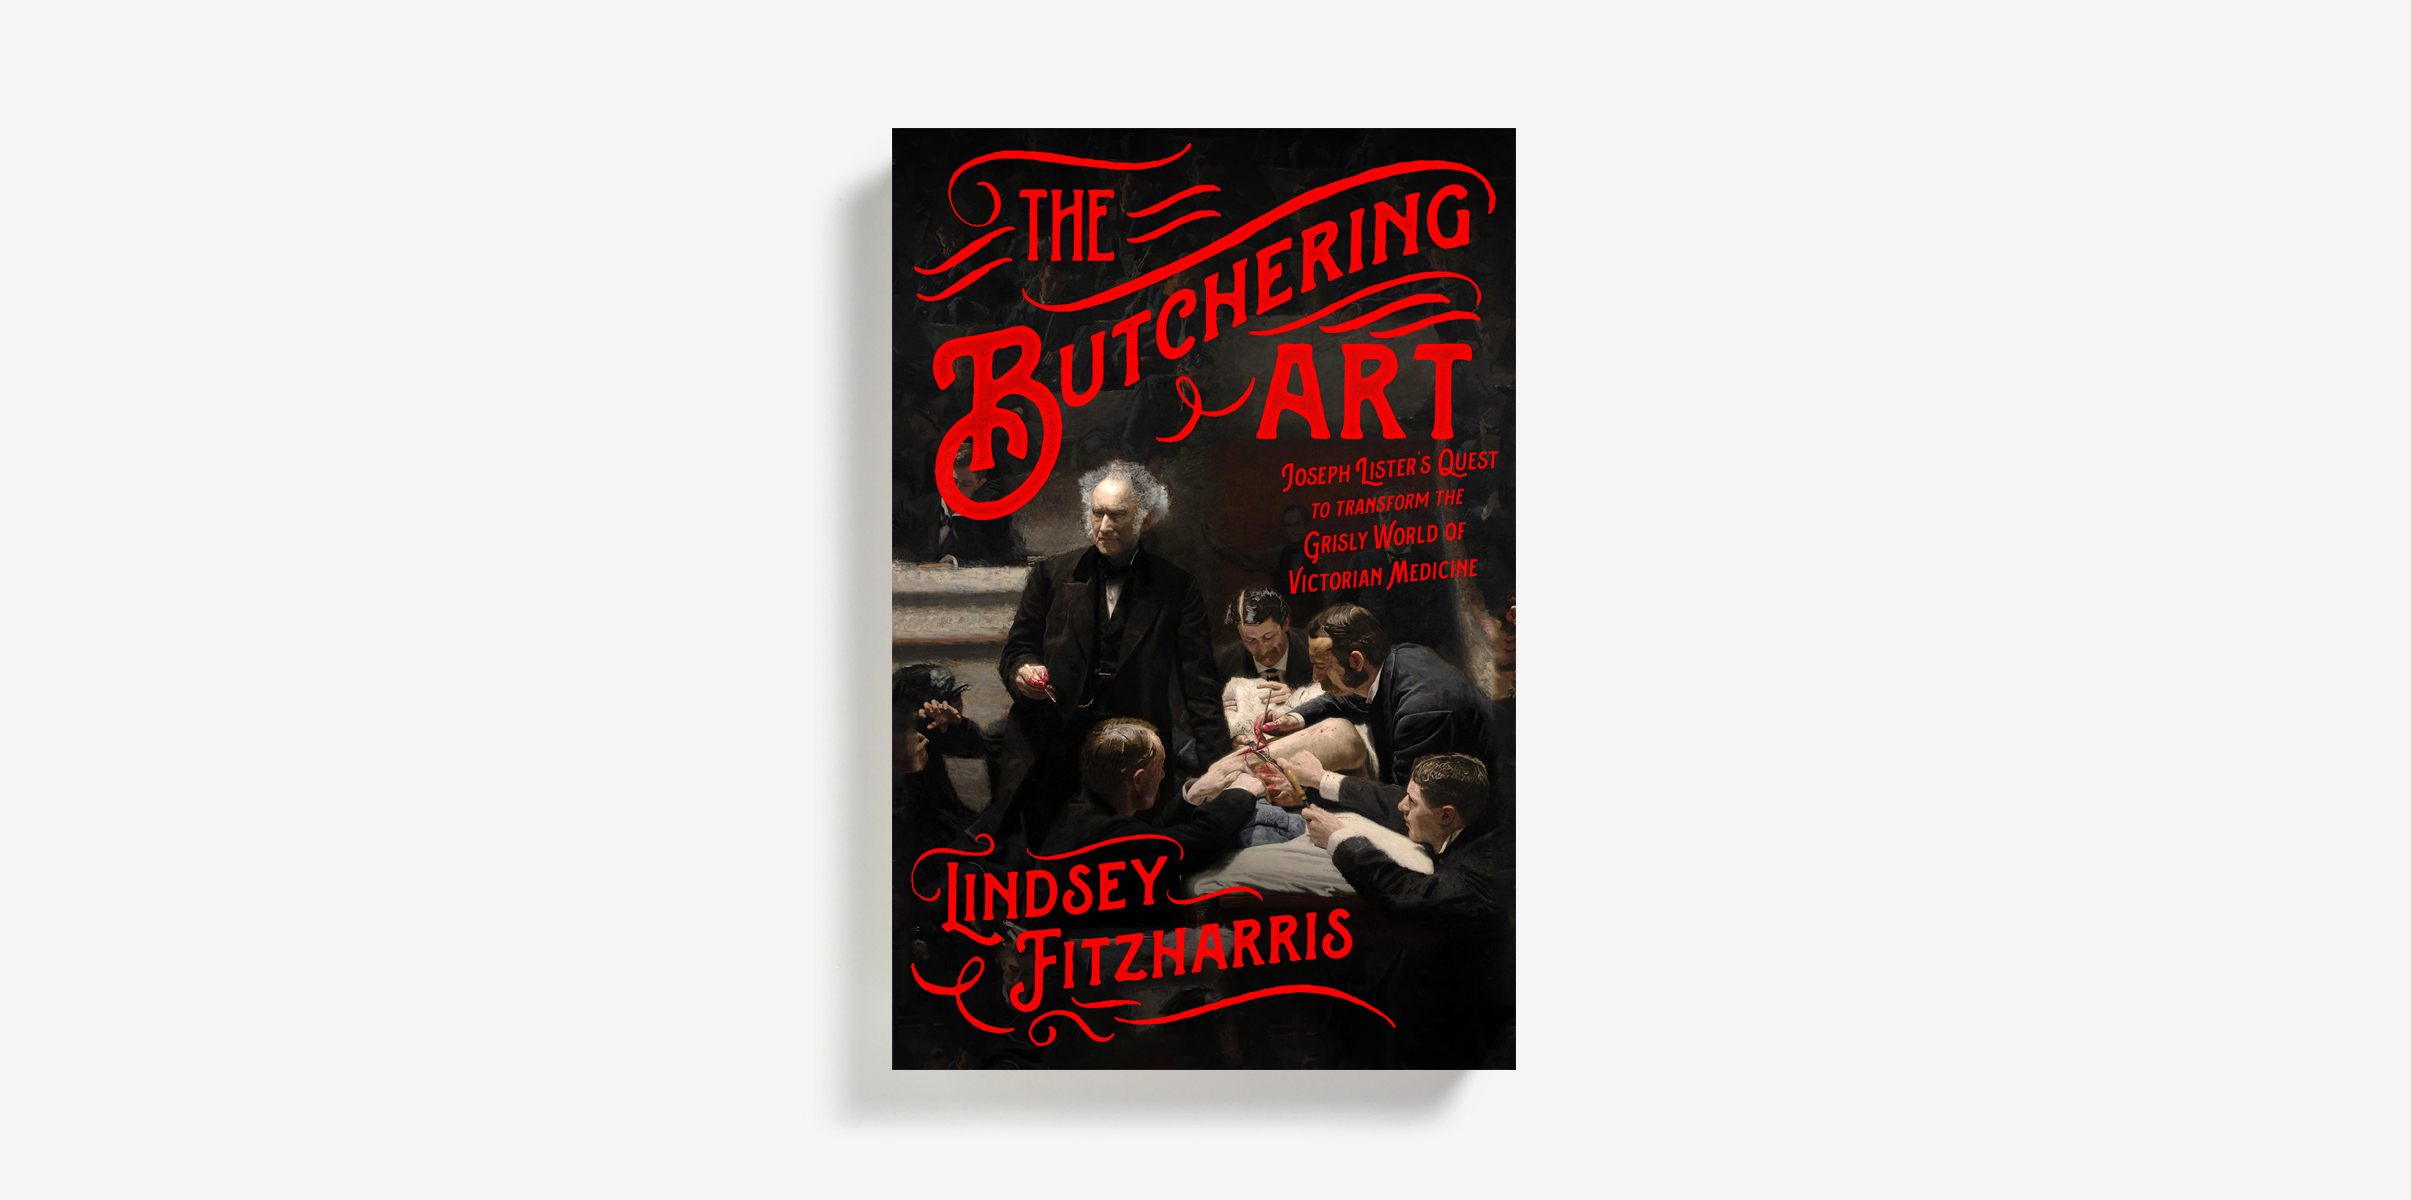 the butchering art book review